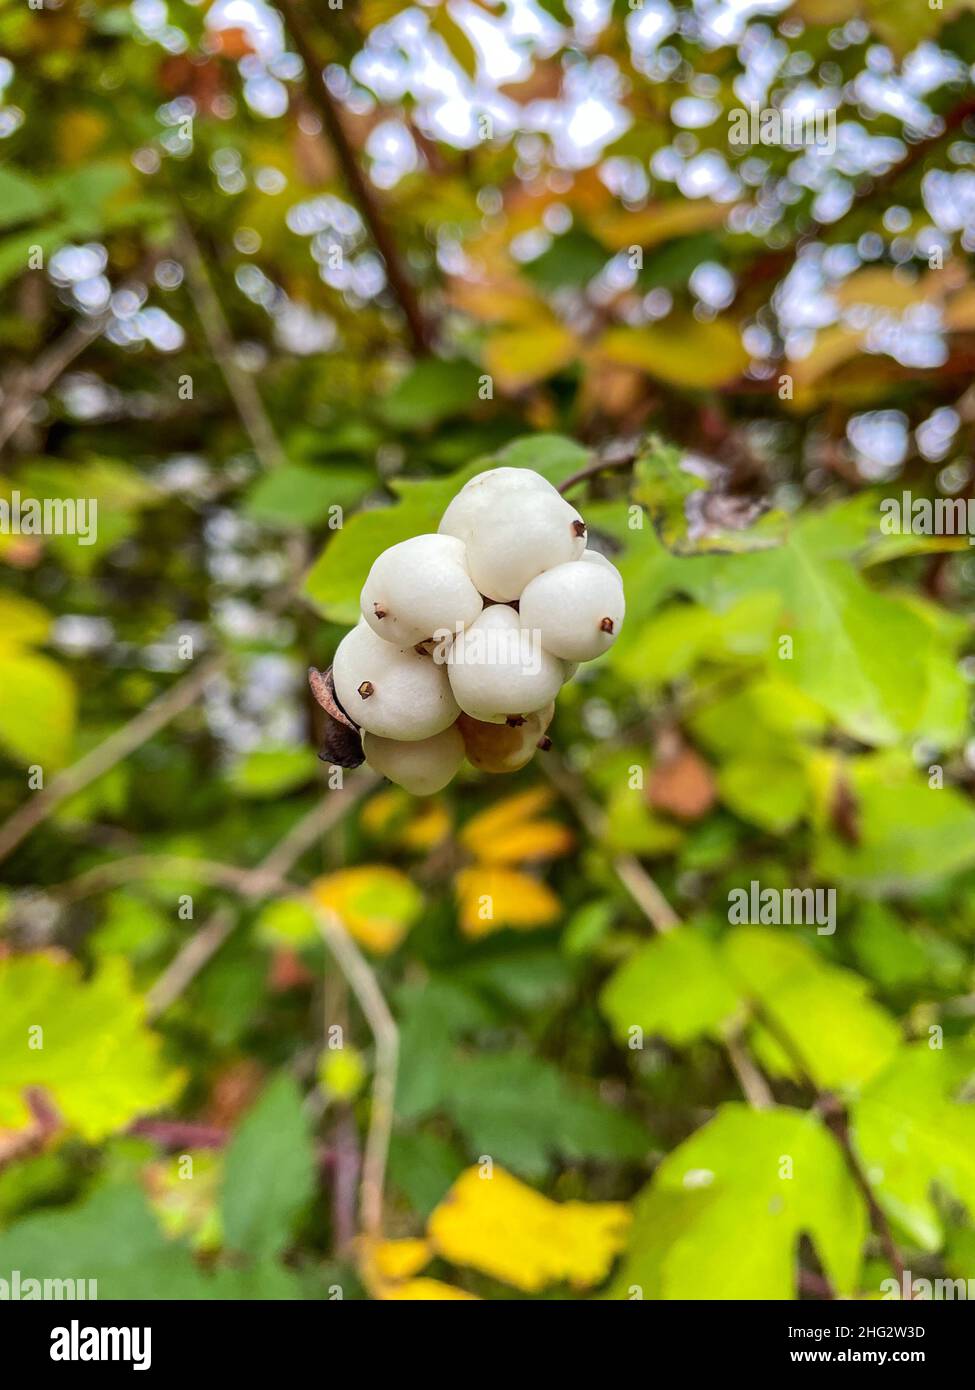 Common snowberry (Symphoricarpos albus) is a species of flowering plant in the honeysuckle family. It is native to North America, where it occurs acro Stock Photo